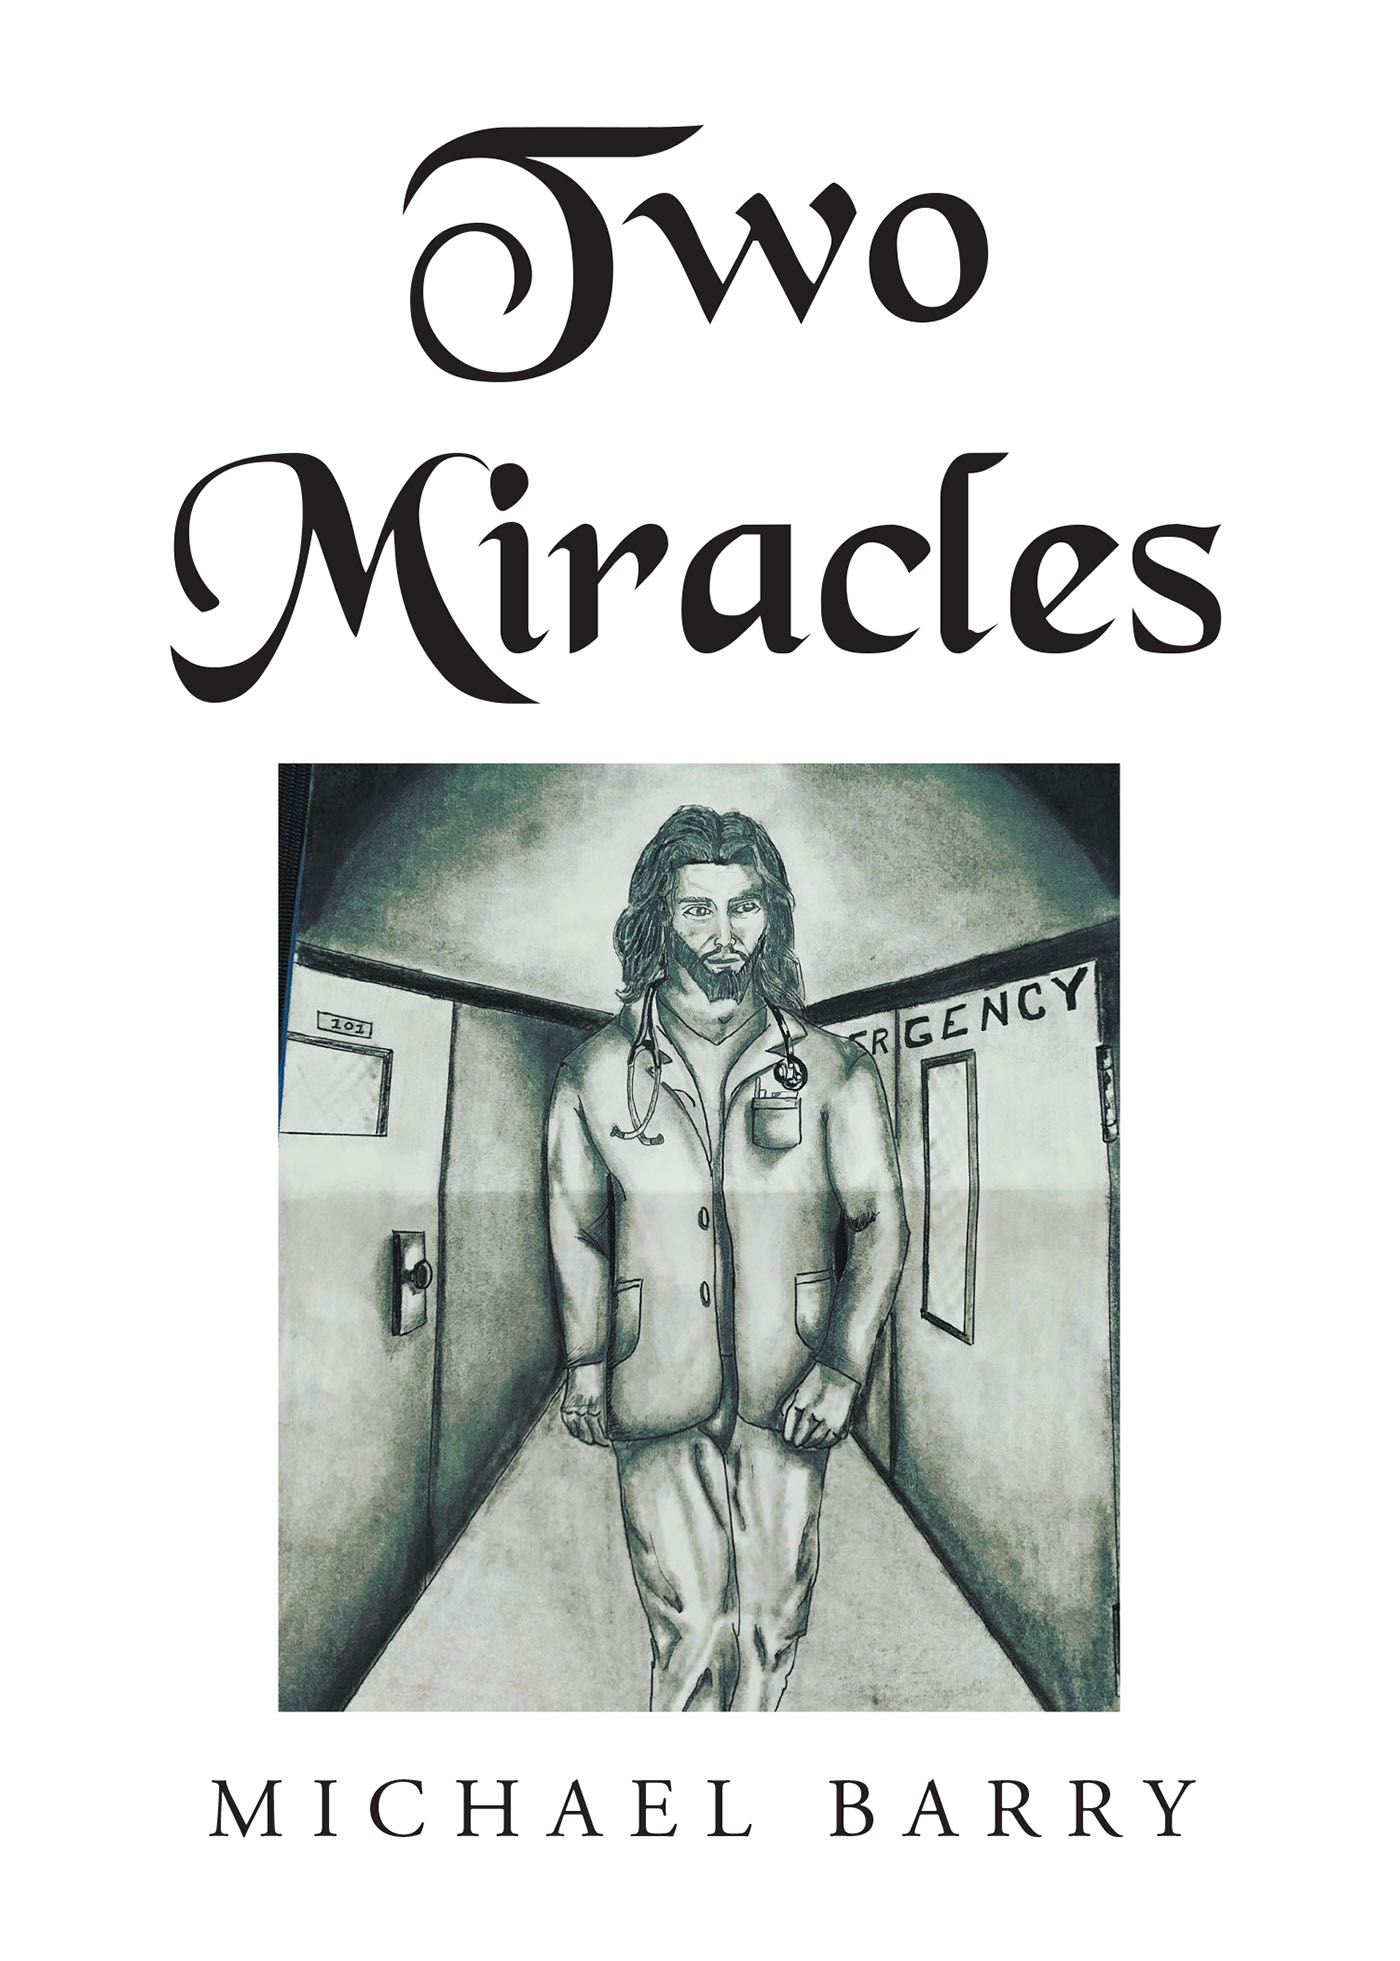 Michael Barry’s Newly Released "Two Miracles" is a Deeply Touching Story of a Family’s Experience with Divine Intervention